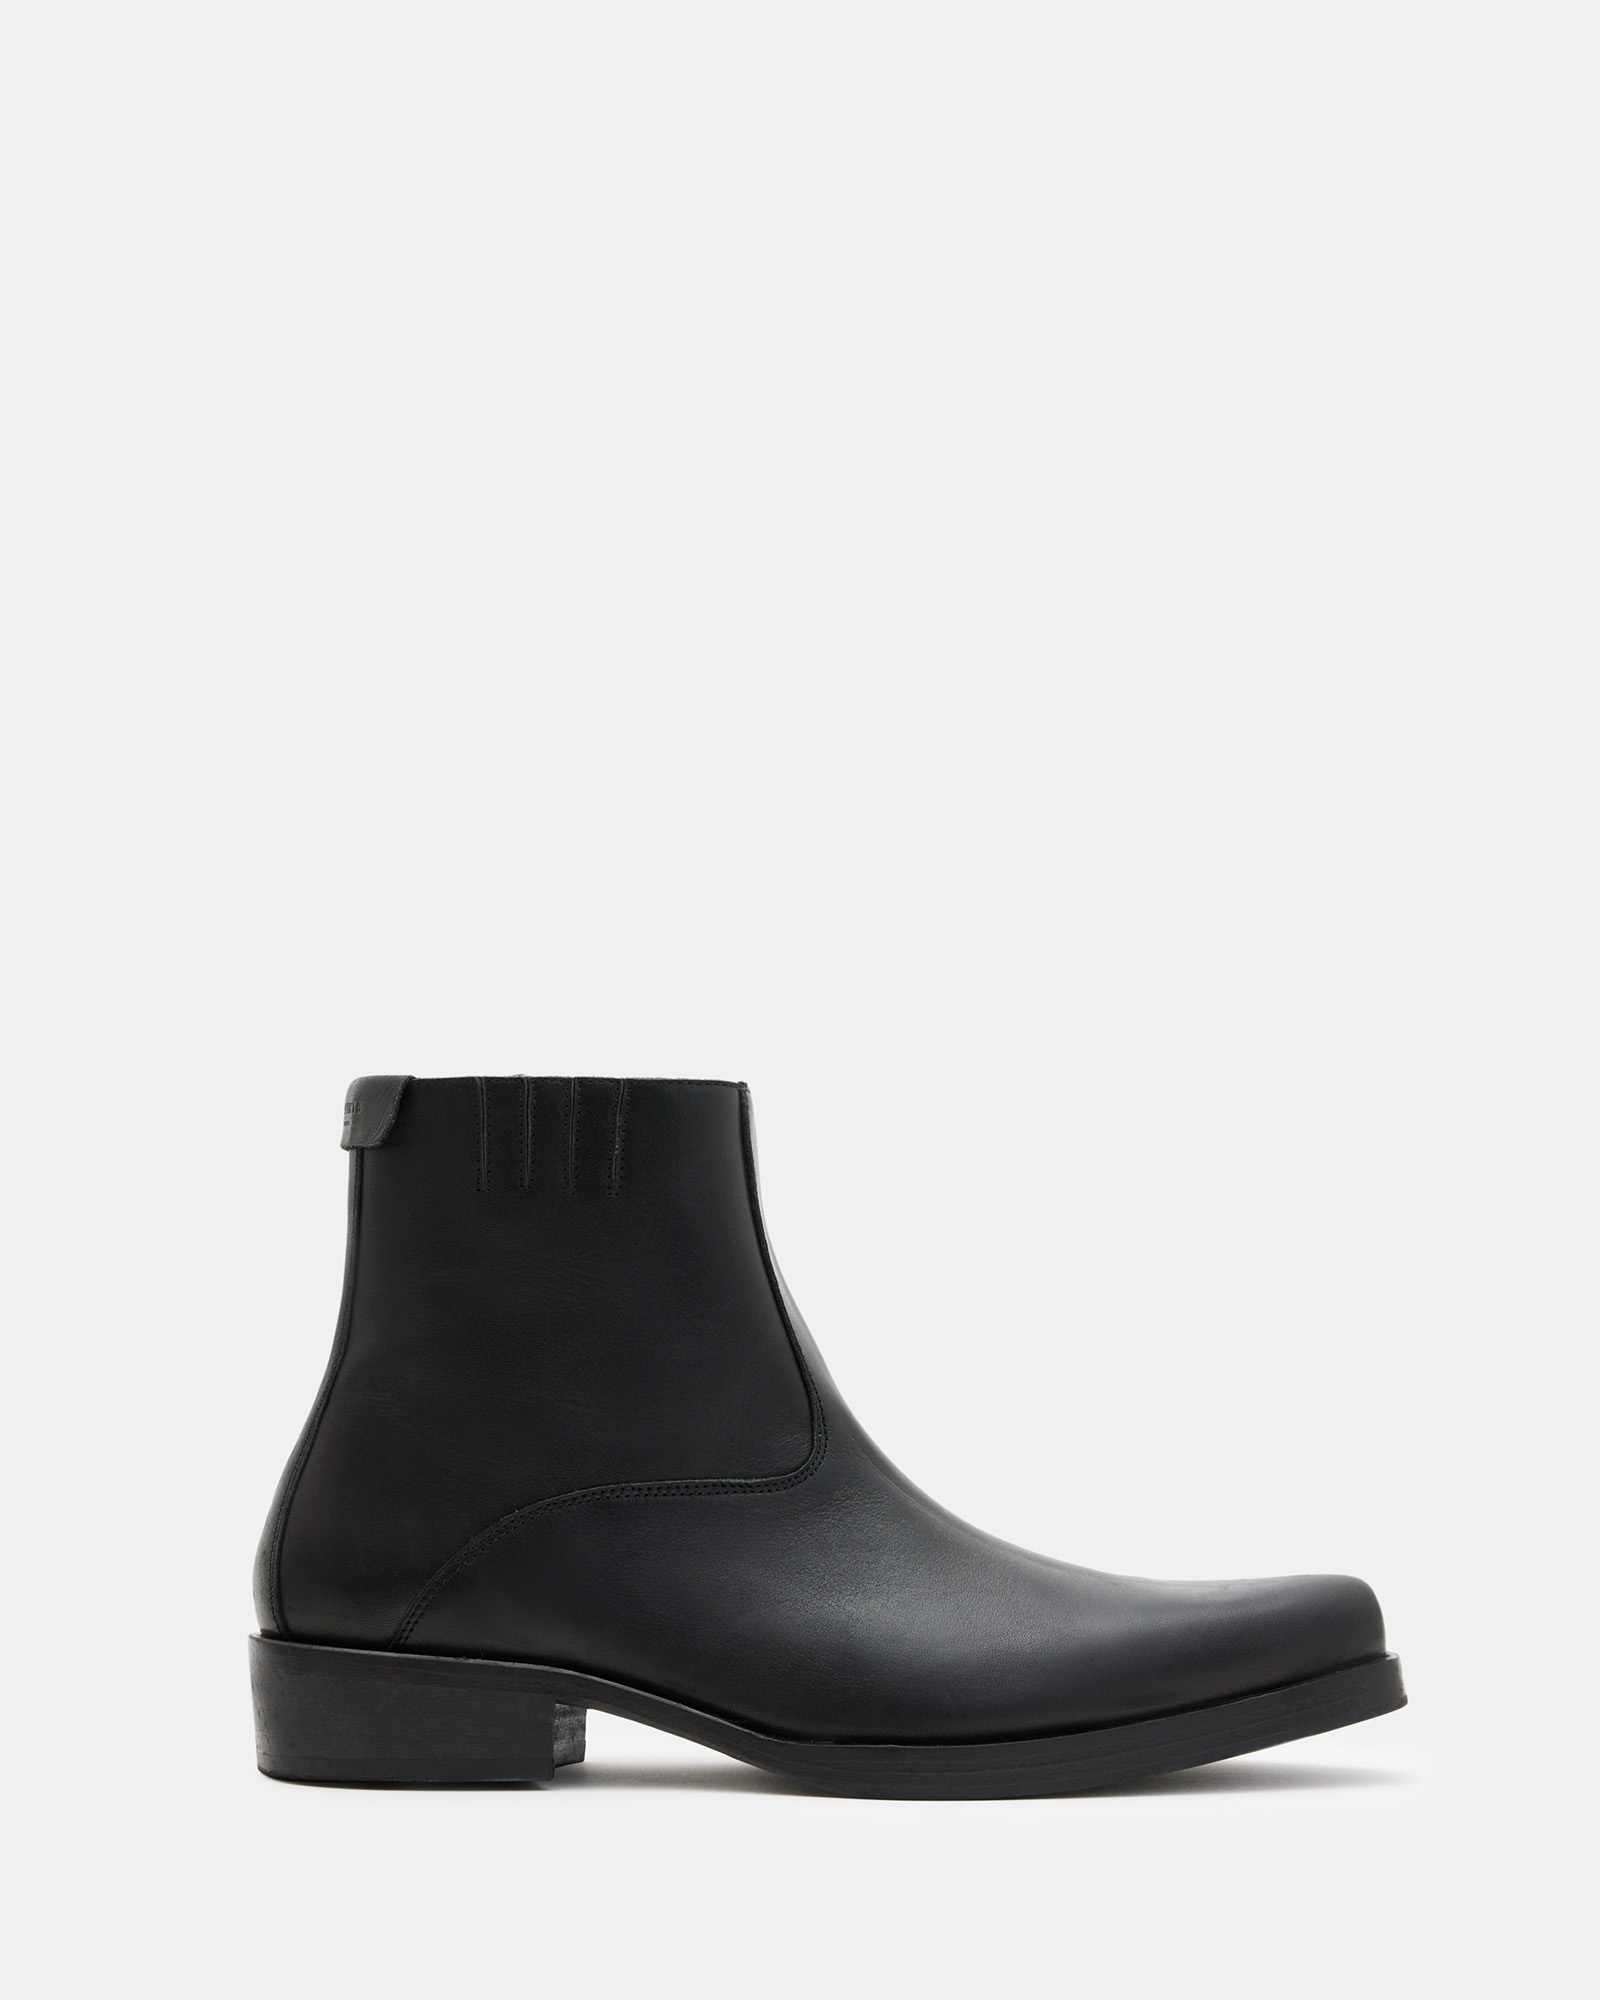 Shop Allsaints Booker Leather Zip Up Boots, In Black